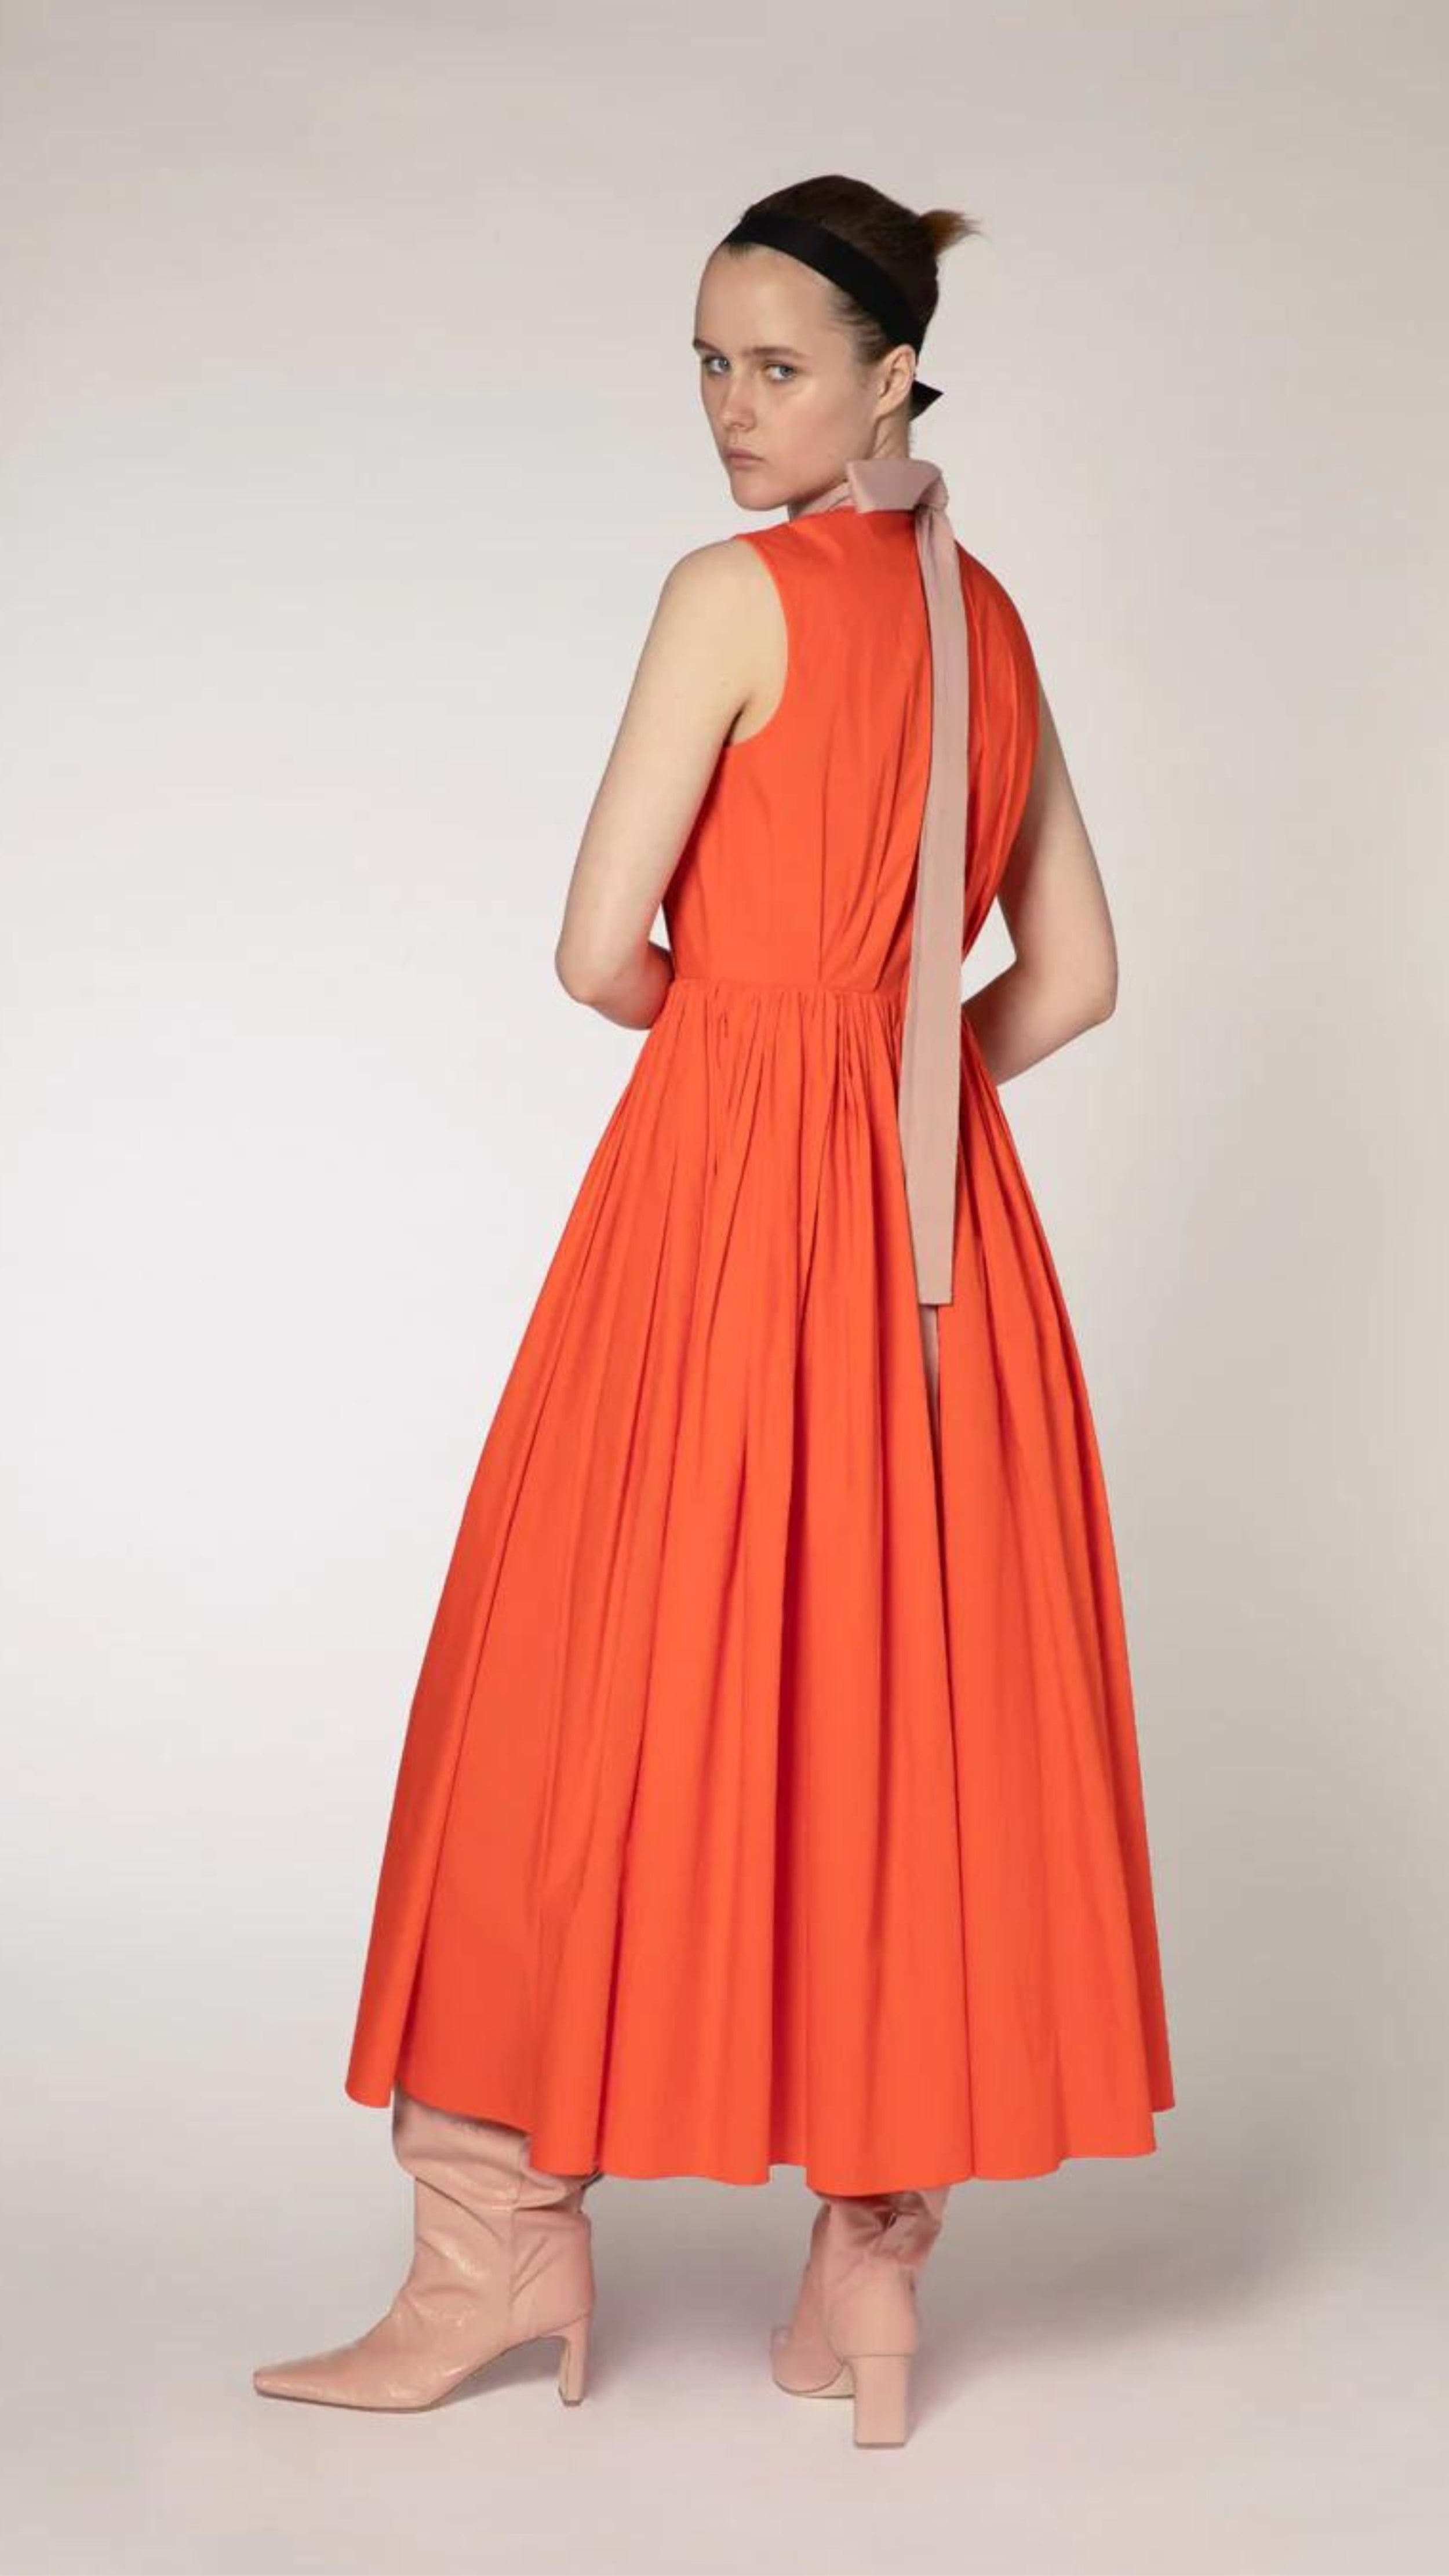 Roksanda The Prinesa Dress. Classic elegant orange cotton dress with a rounded neckline, fitted waist and pleated midi length skirt. Highlighted with a pale pink ribbon collar that ties at the nape of the neck. Shown on model facing back.